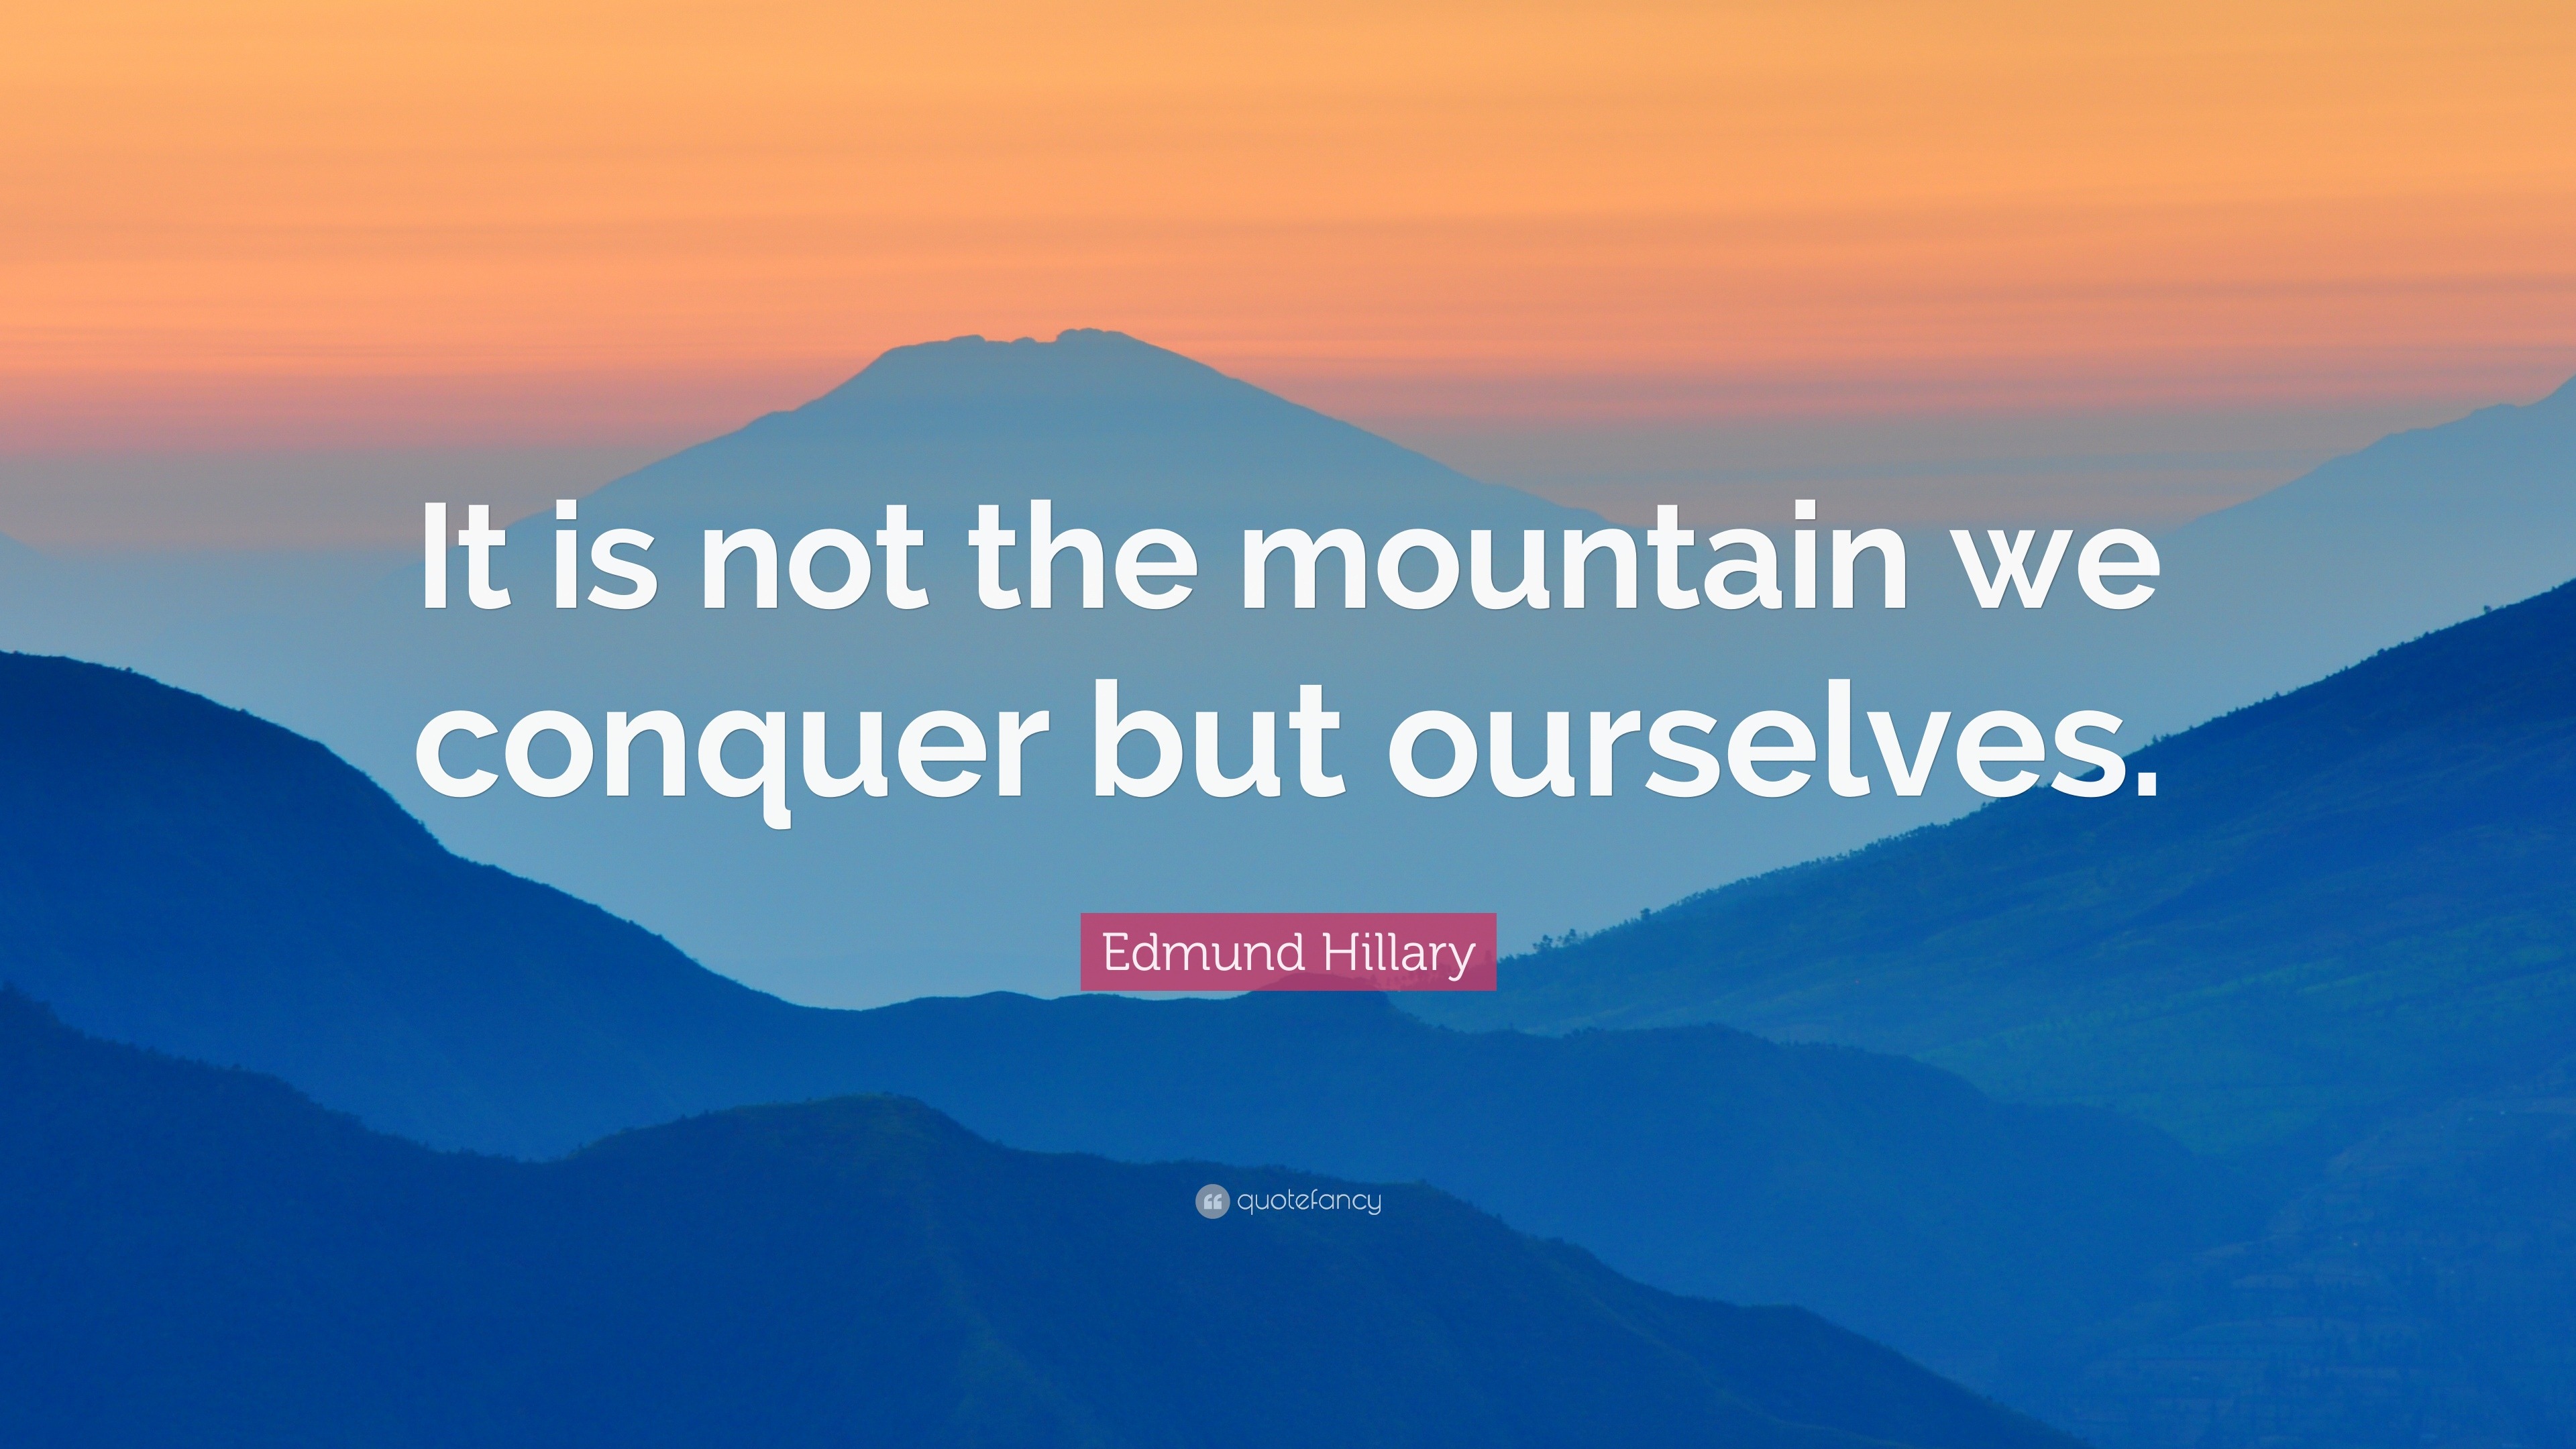 Edmund Hillary Quotes (48 wallpapers) - Quotefancy